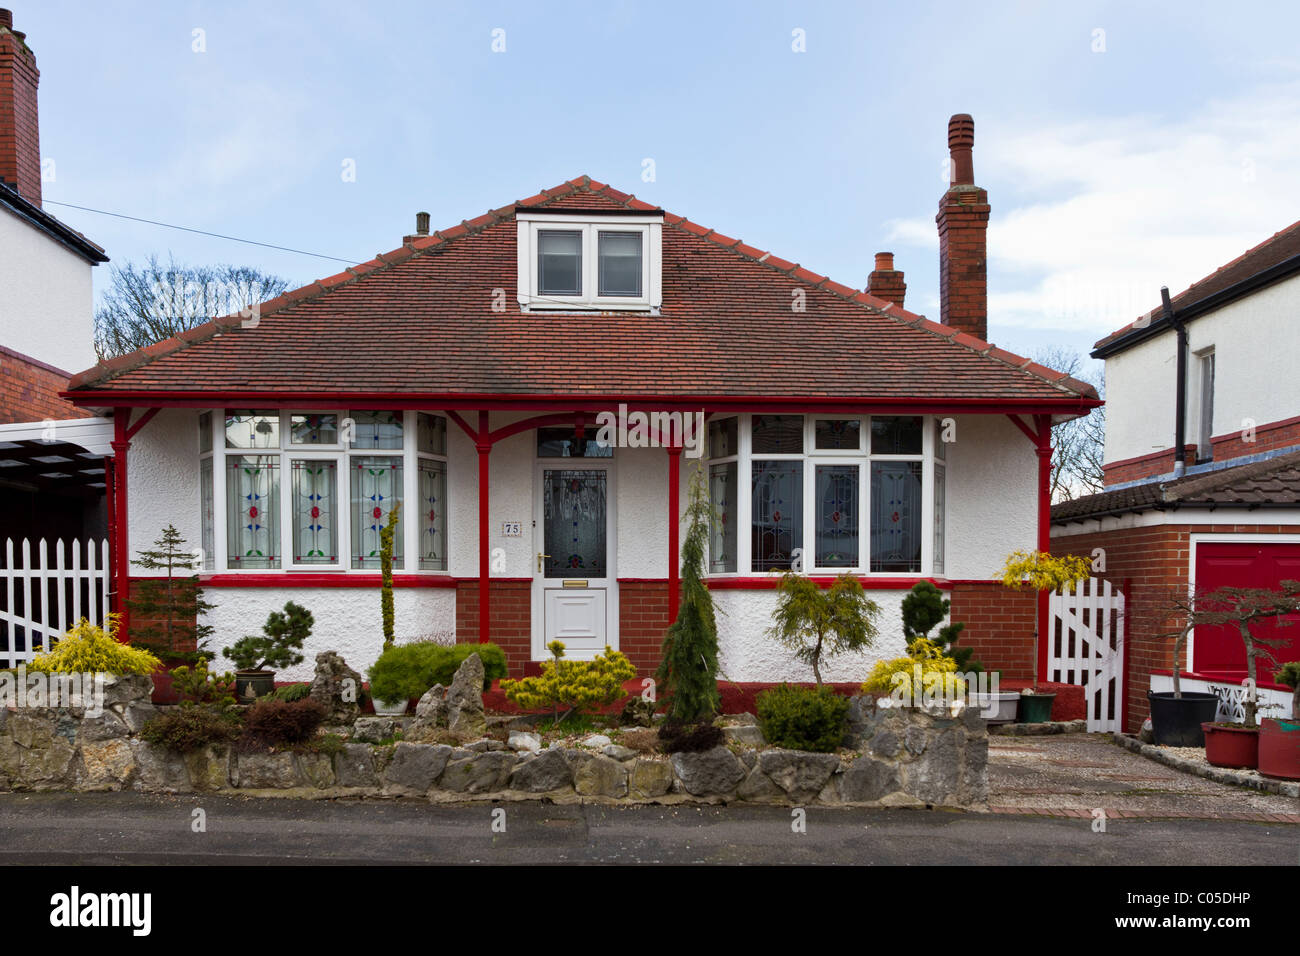 Well-maintained 1920s bungalow of brick with tiled roof and dormer window Stock Photo